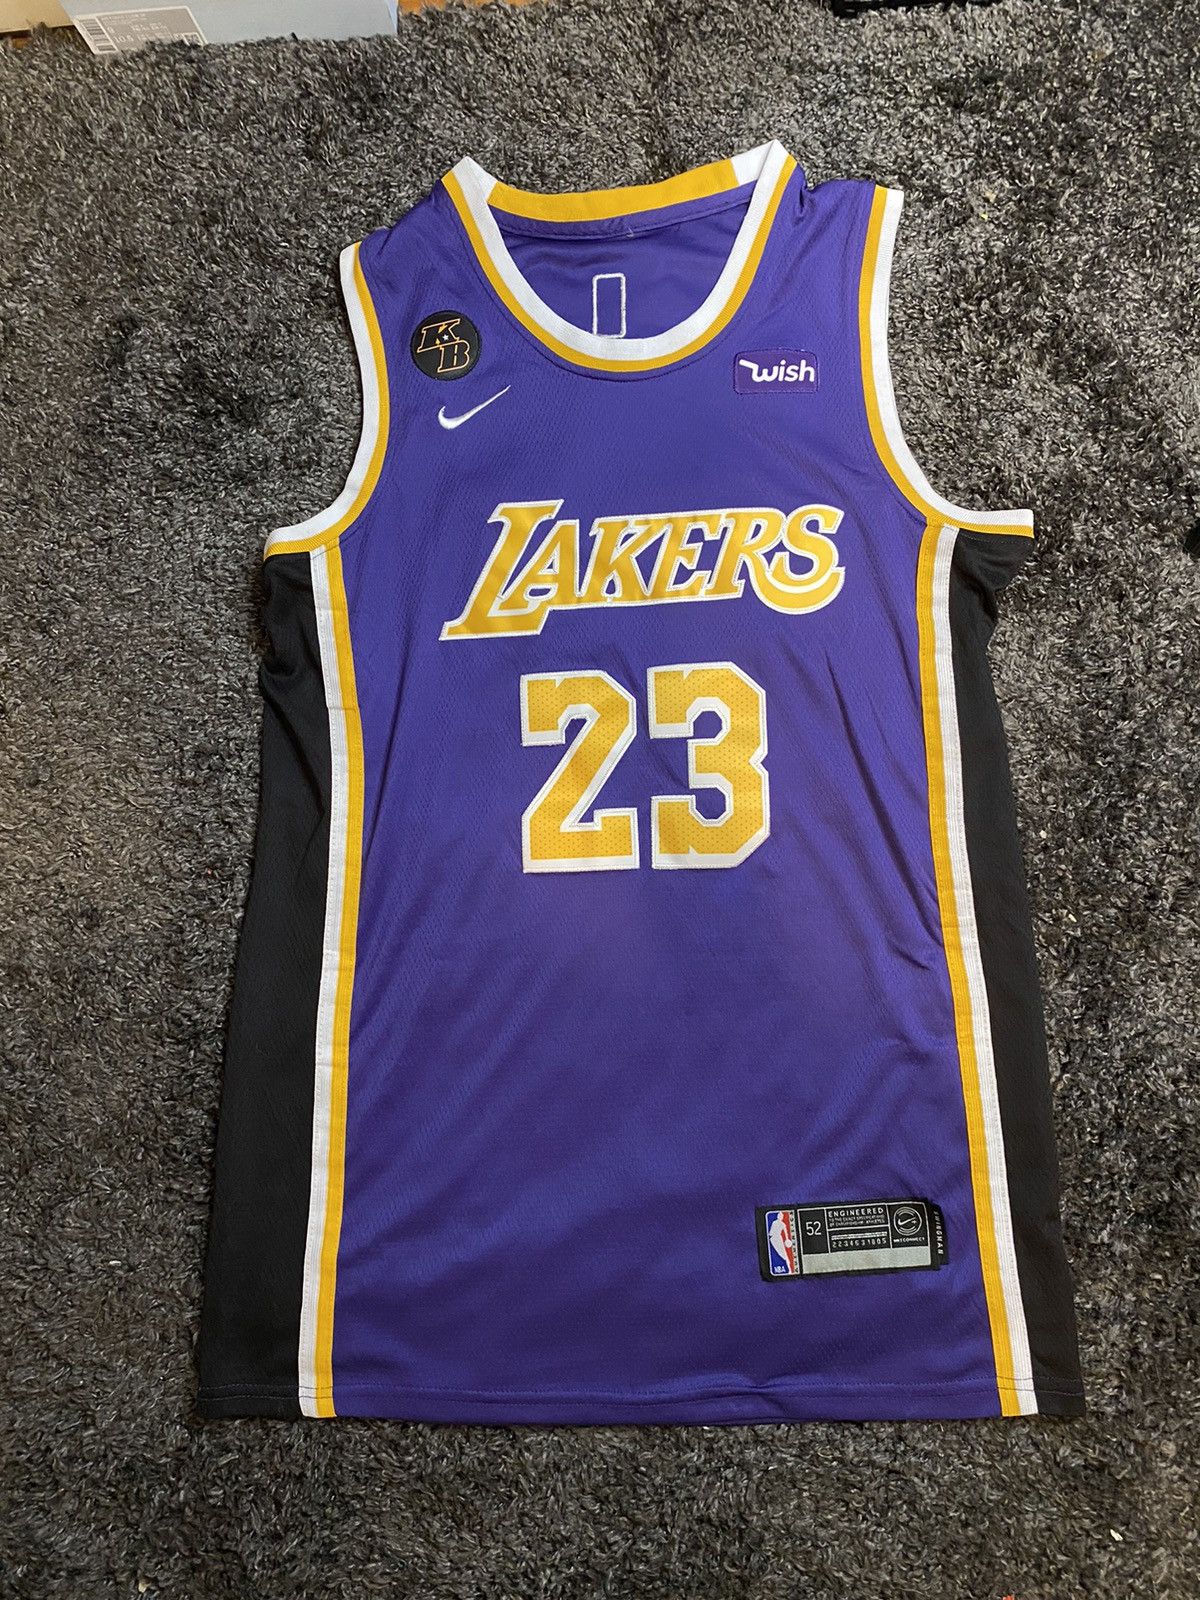 Authentic Lebron James Nike Statement Lakers Jersey Size 52 XL Wish Patch